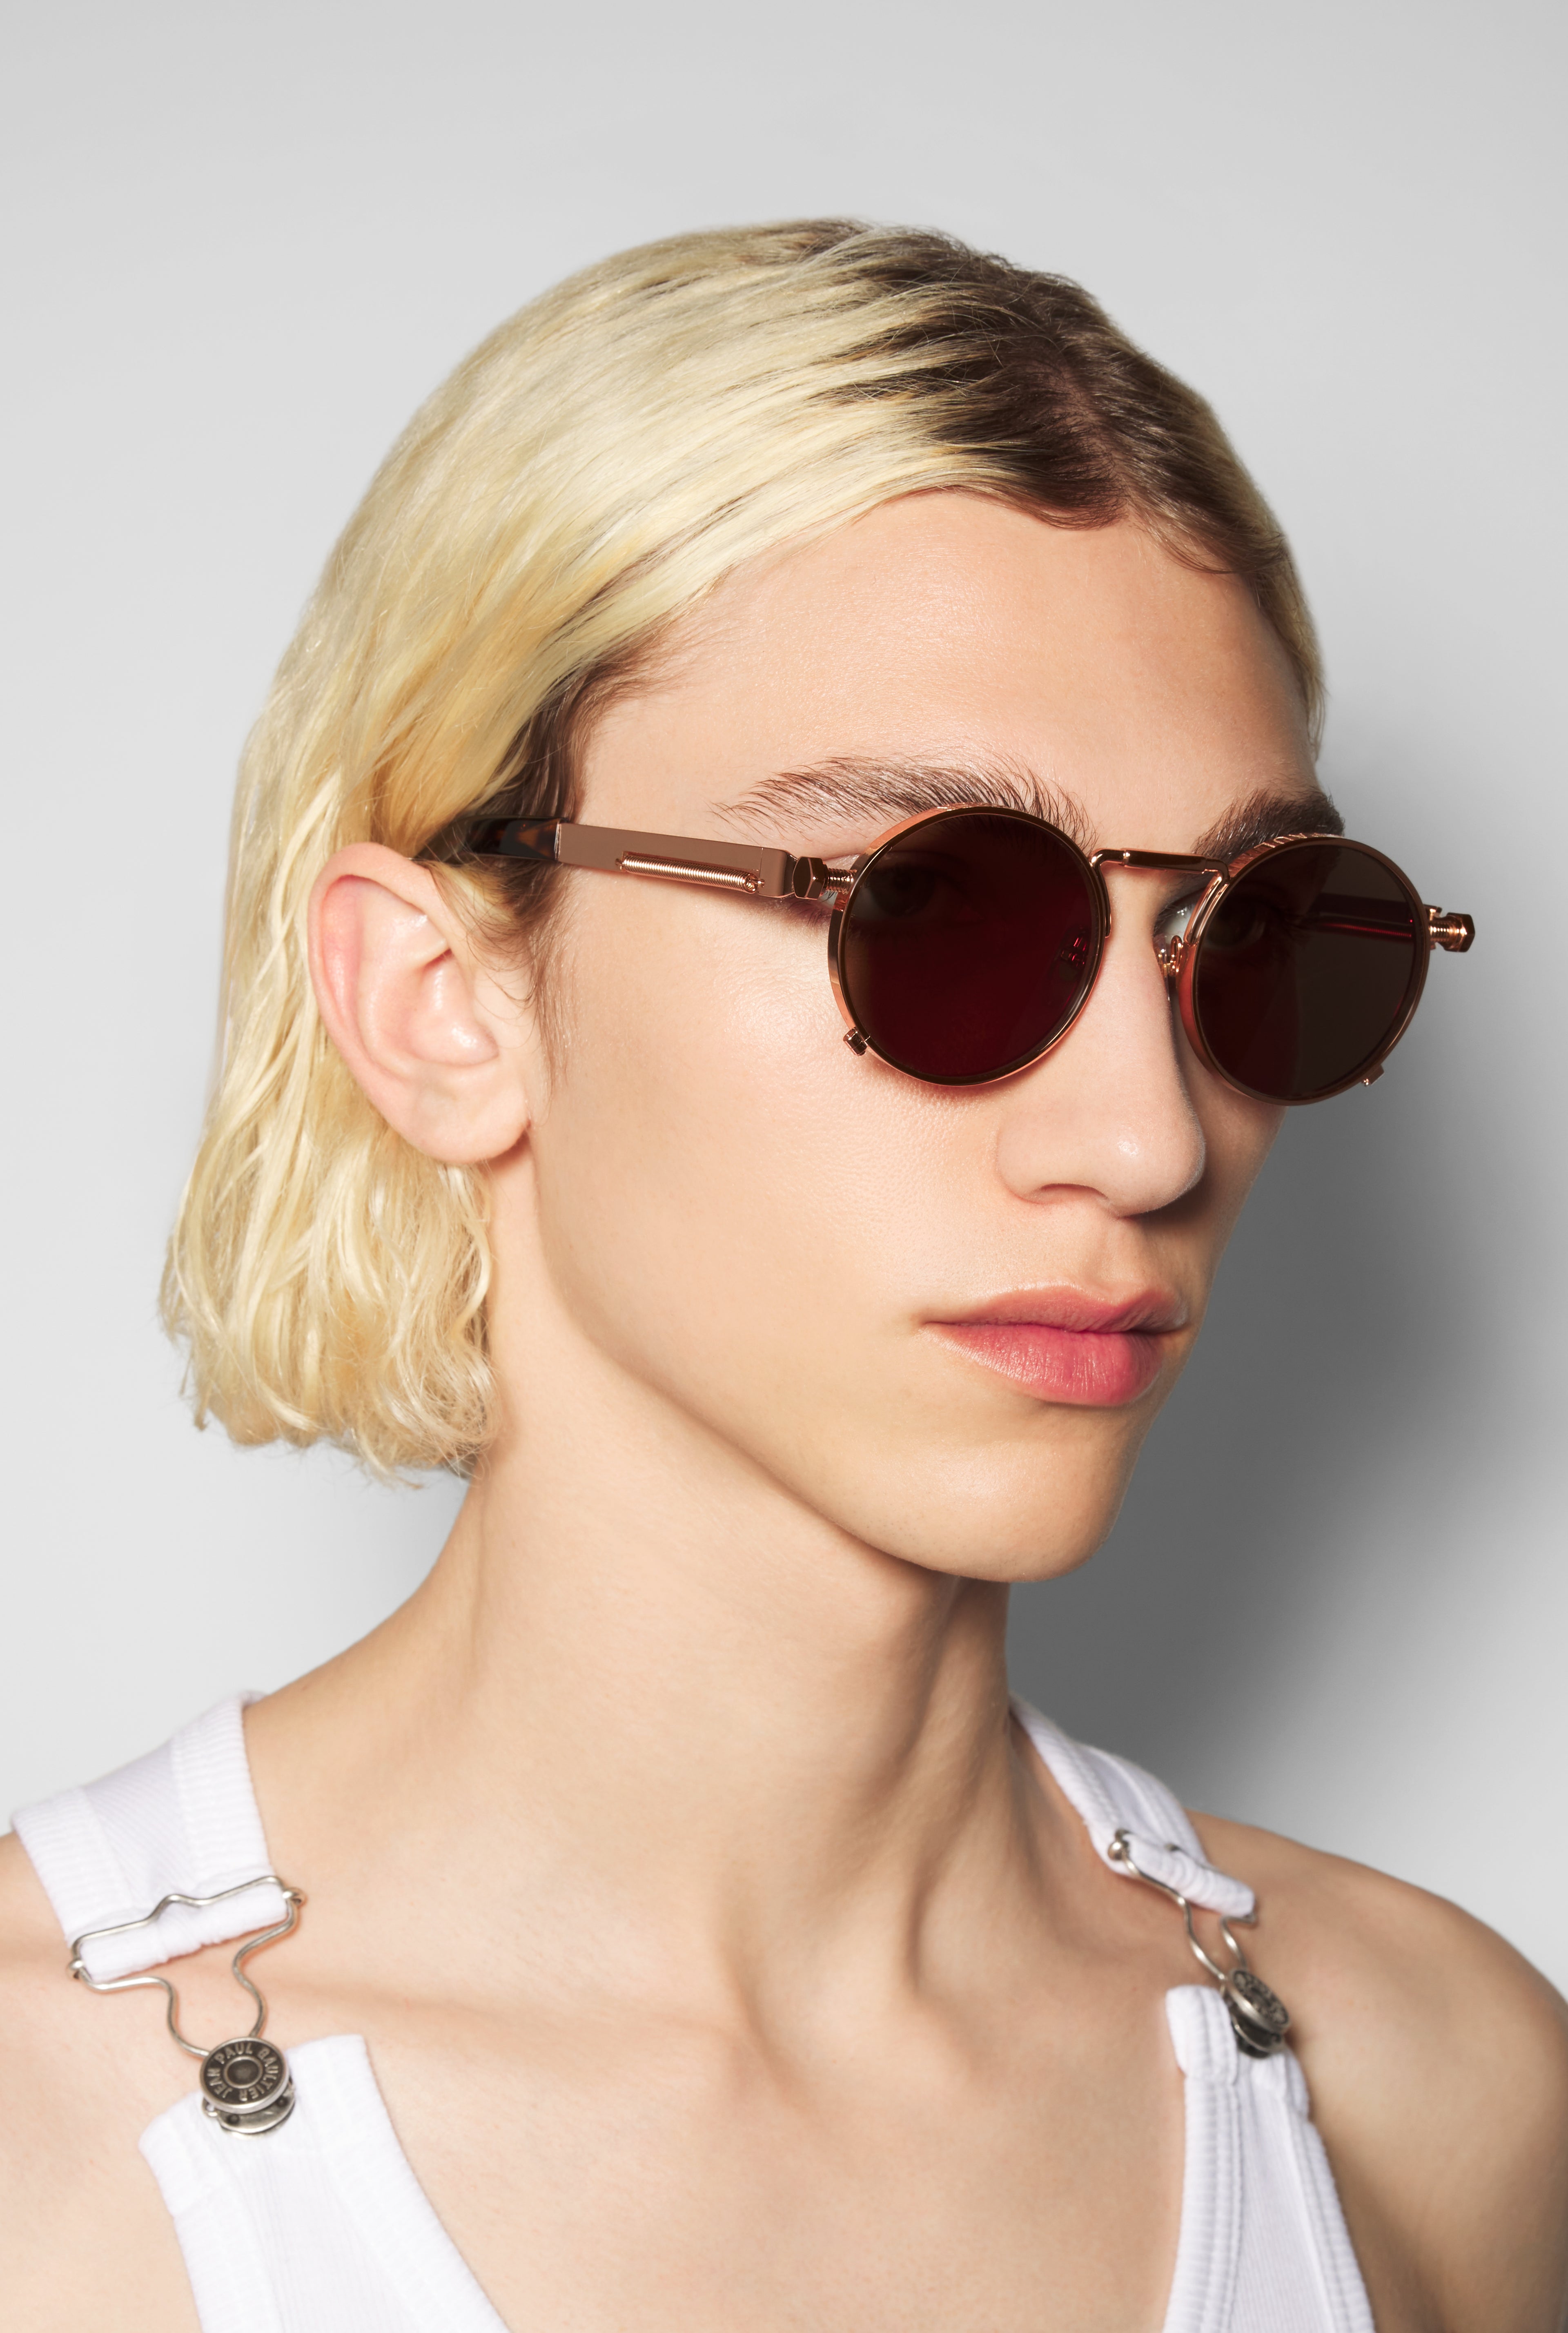 The Pink Gold 56-8171 Sunglasses